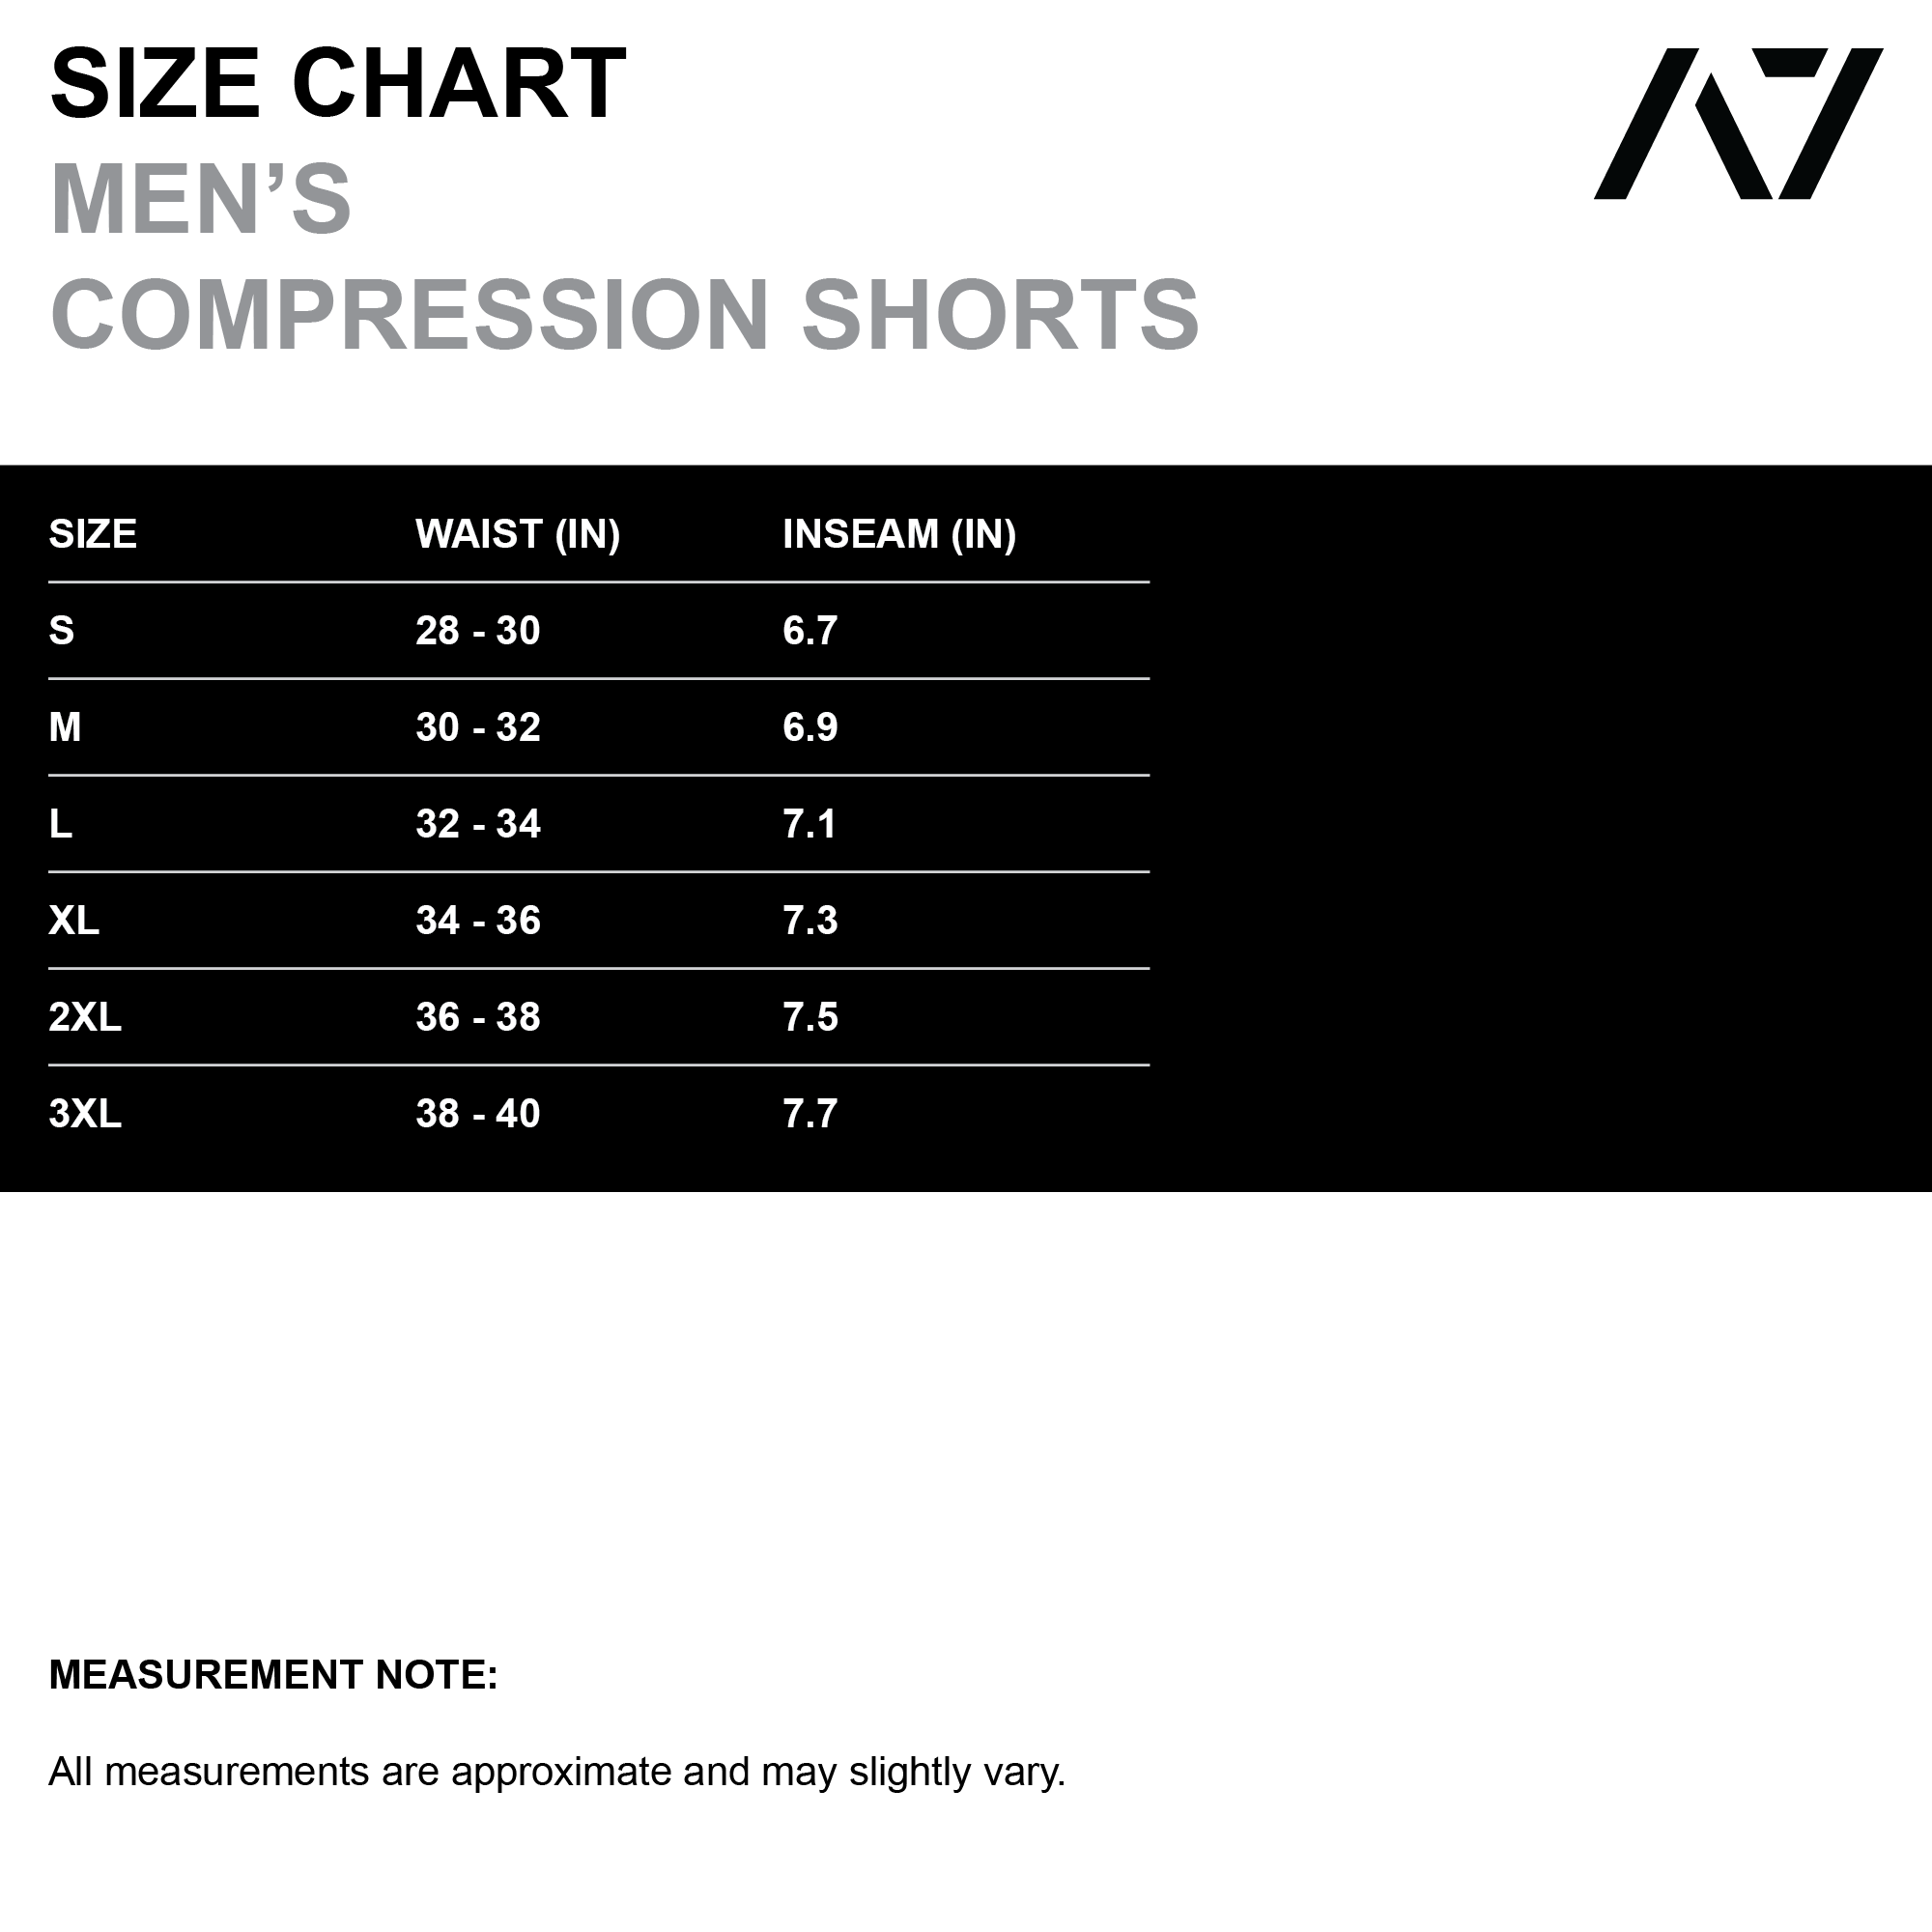 A7 OX compression shorts are perfect for training at a hot gym and even going for a jog outside. The shorts are made out of soft yet moisture-wicking fabric that allows for ultimate performance. A cell phone pocket and a key clip are added to make sure you have your valuables with you at all times.